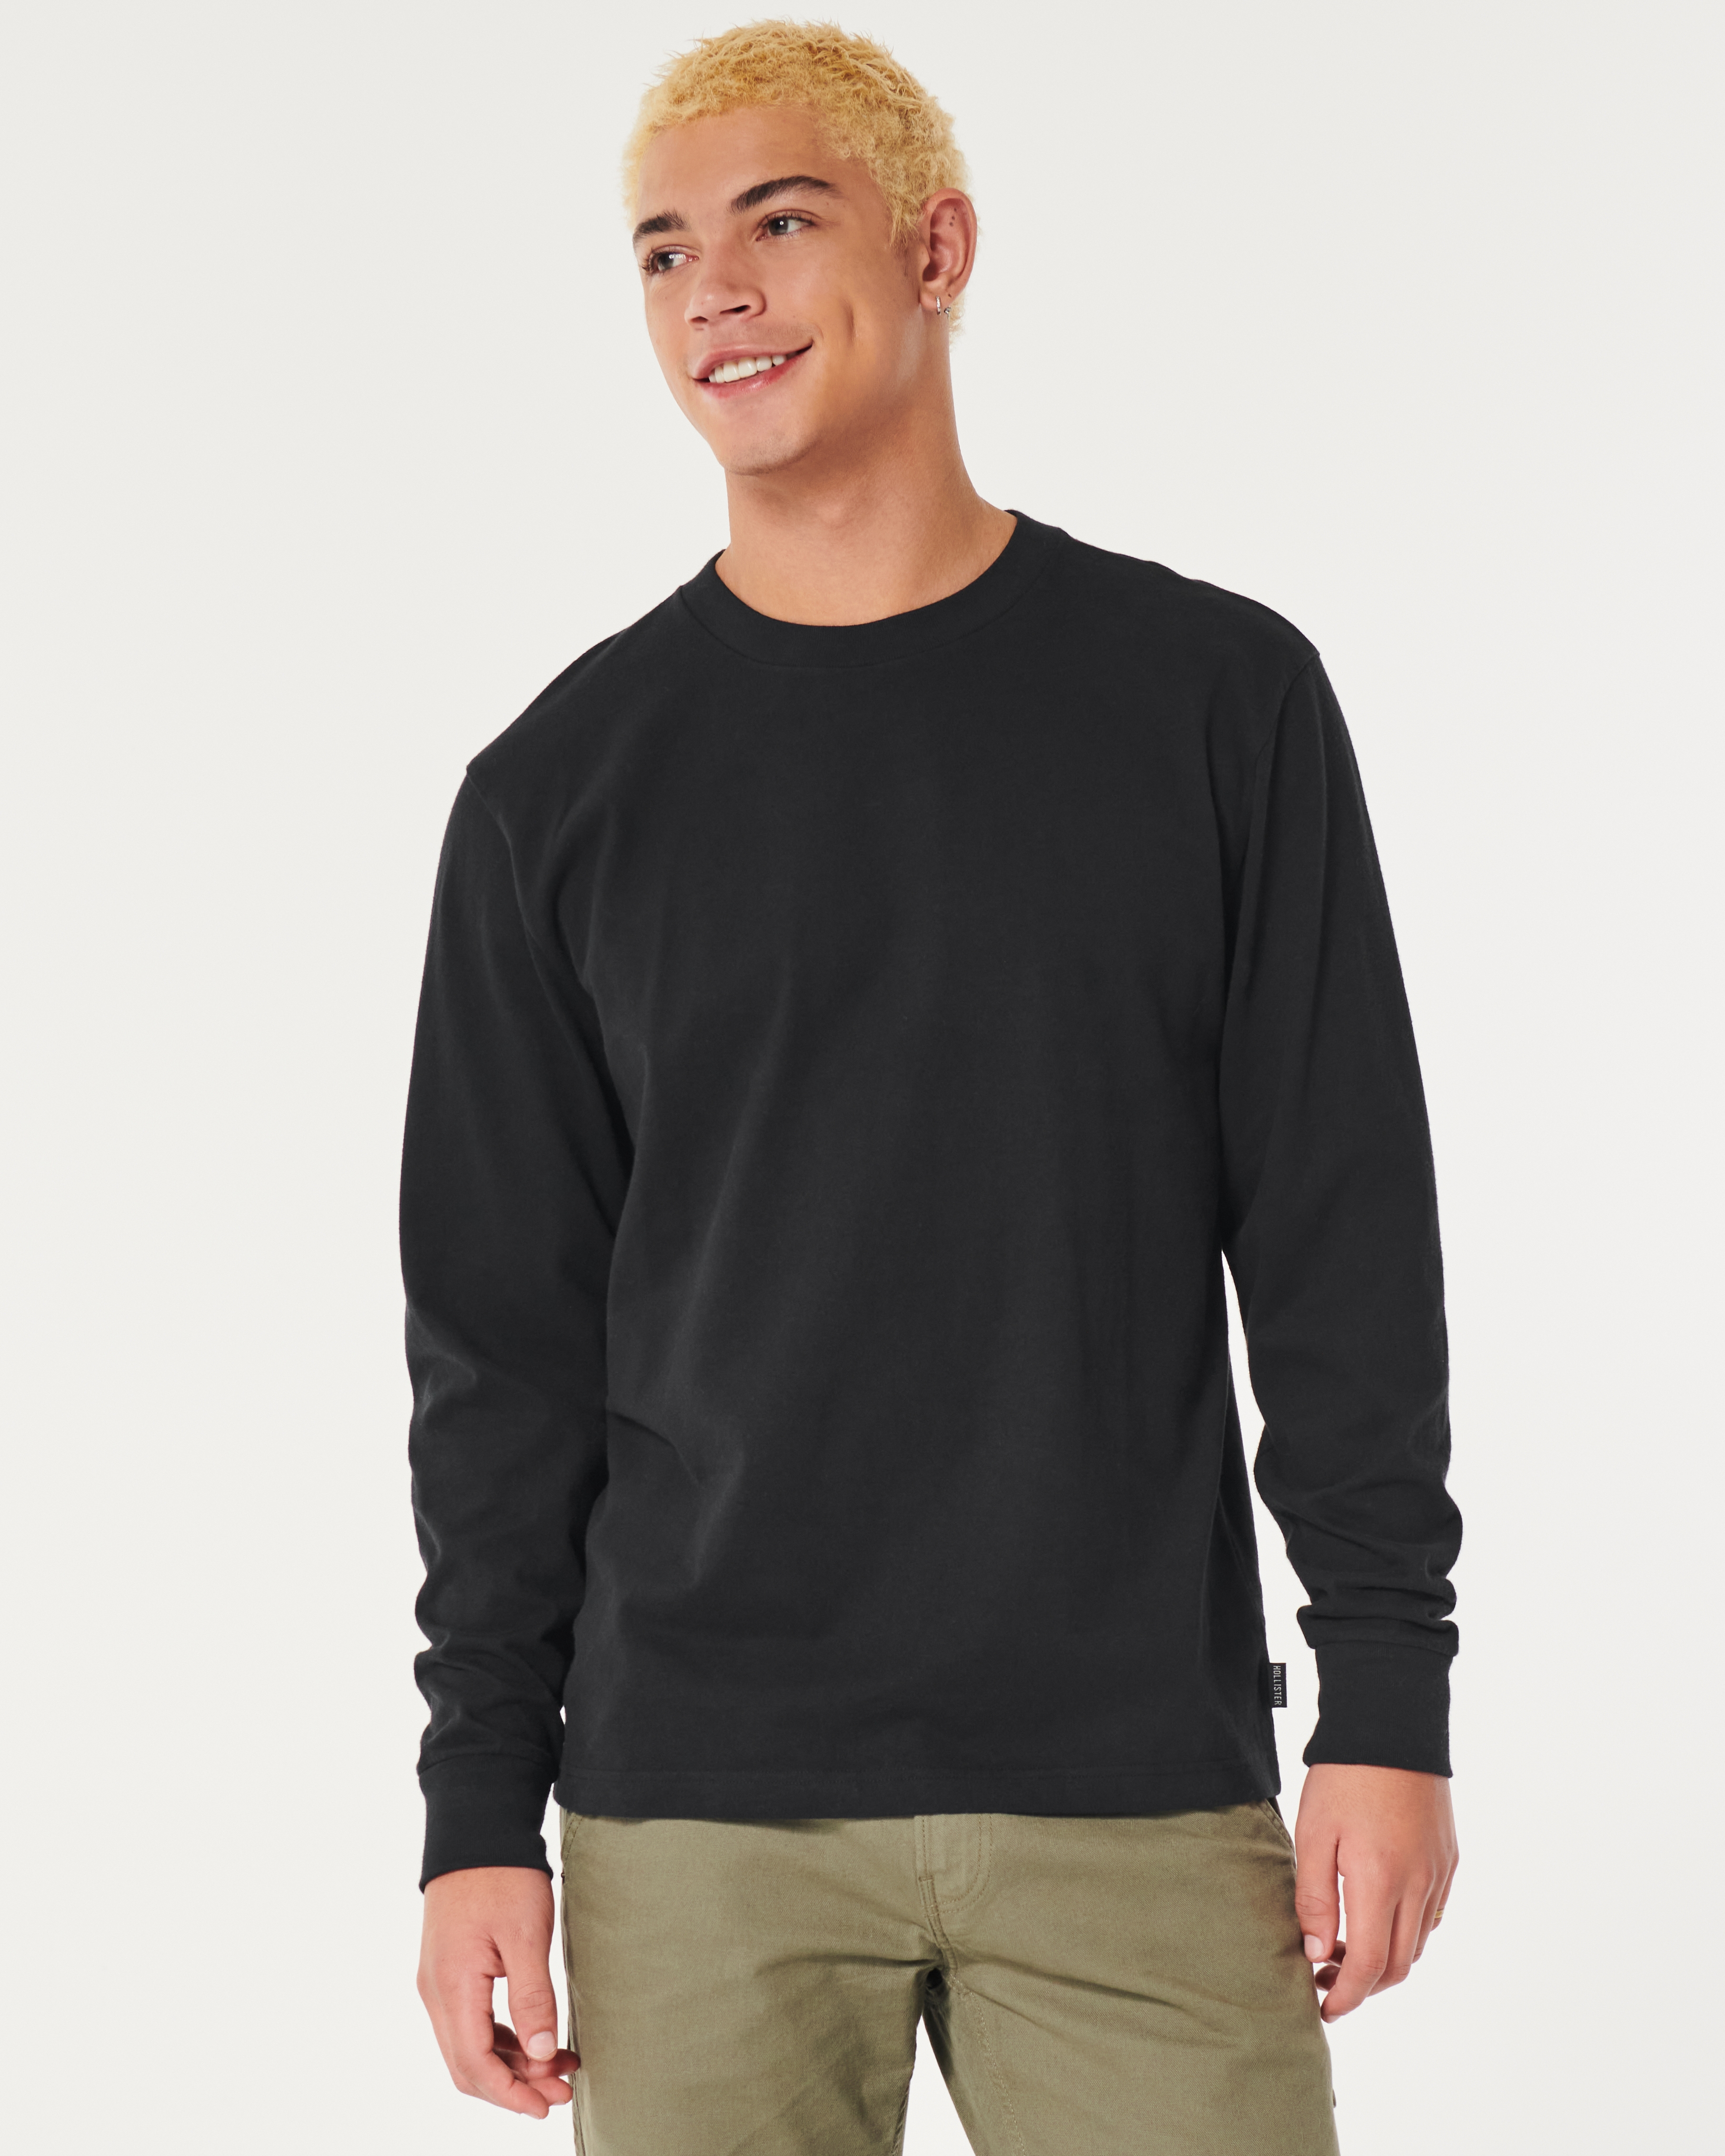 Hollister Relaxed Long-Sleeve Logo Graphic Tee